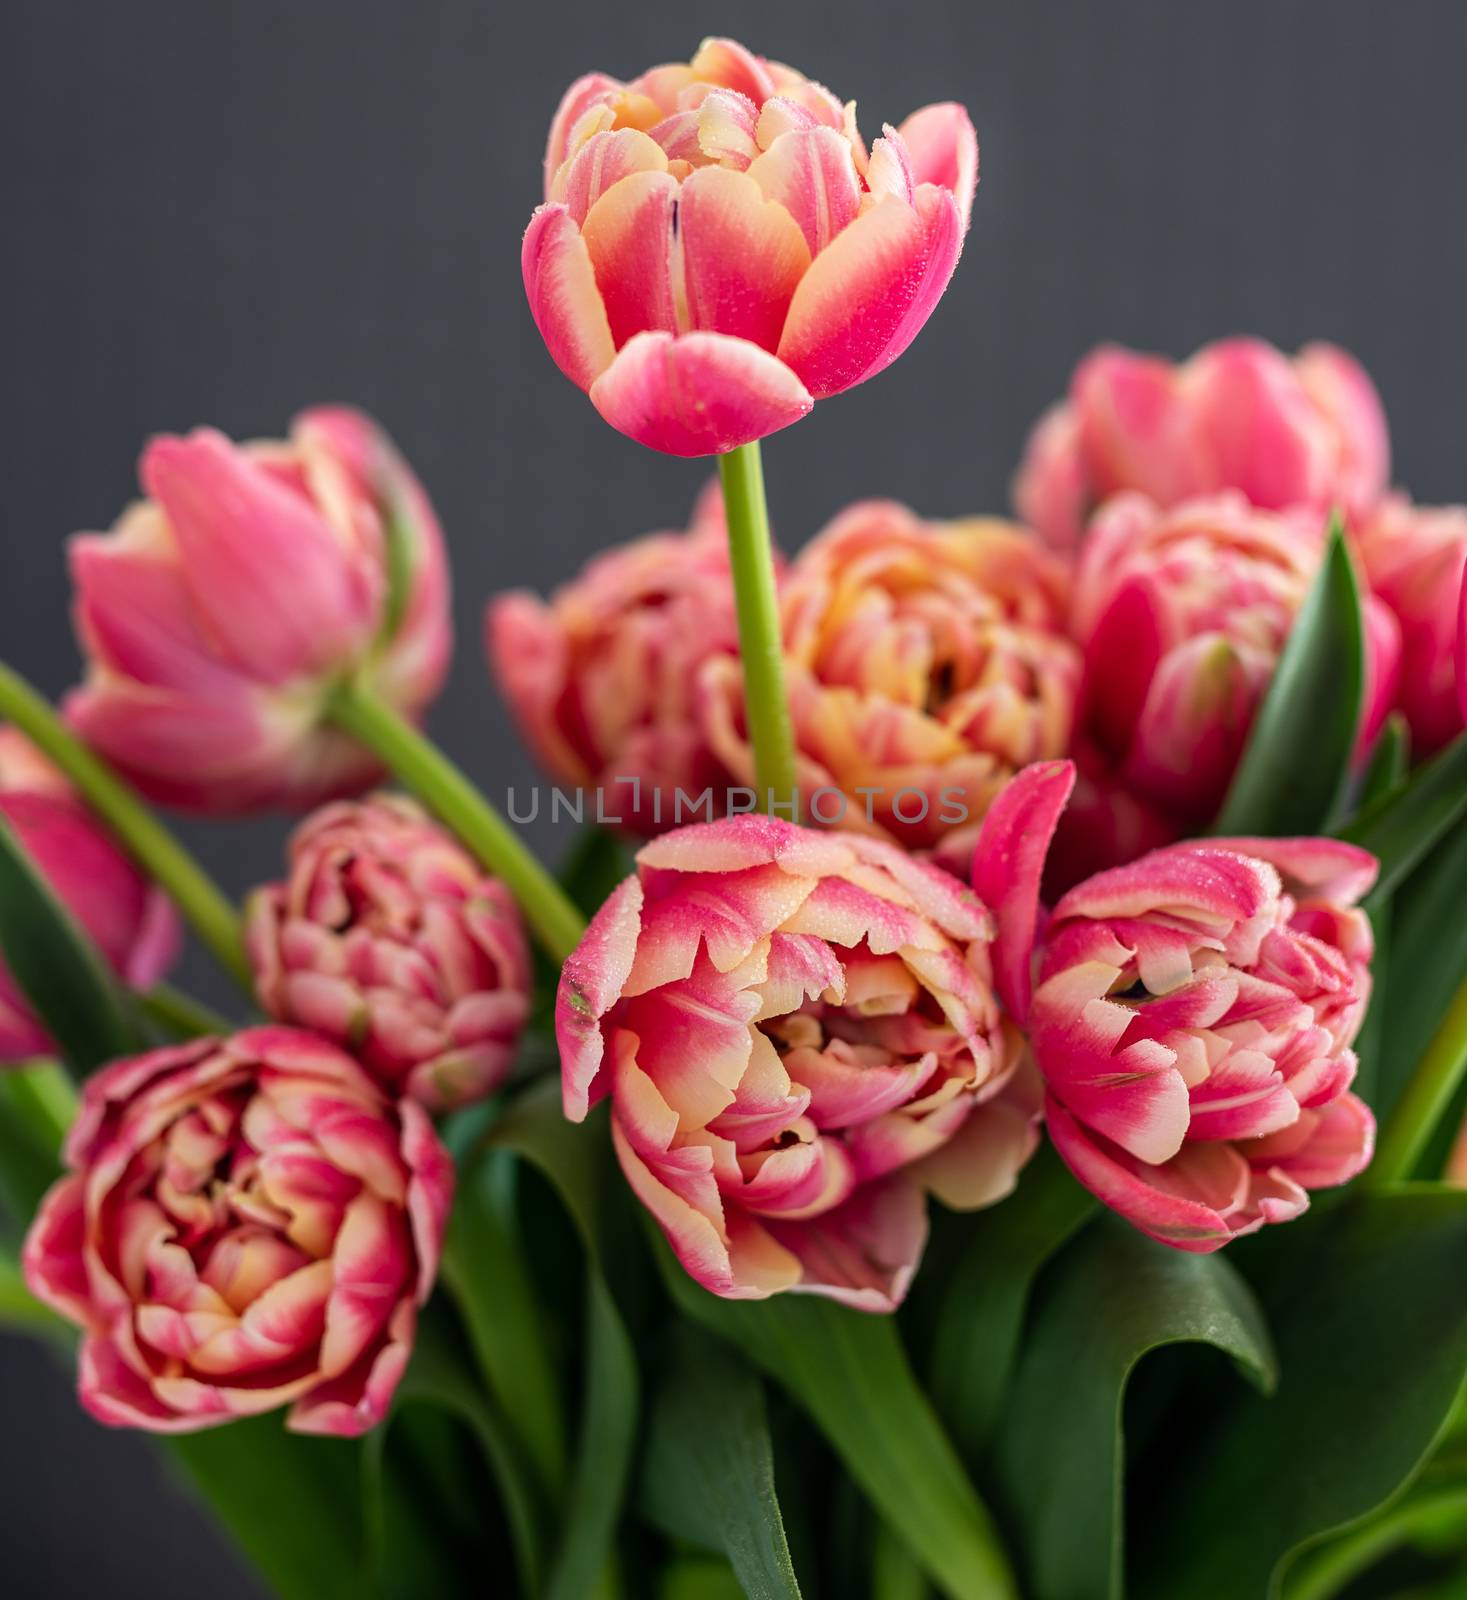 Red and yellow parrot tulips on grey background by mkenwoo